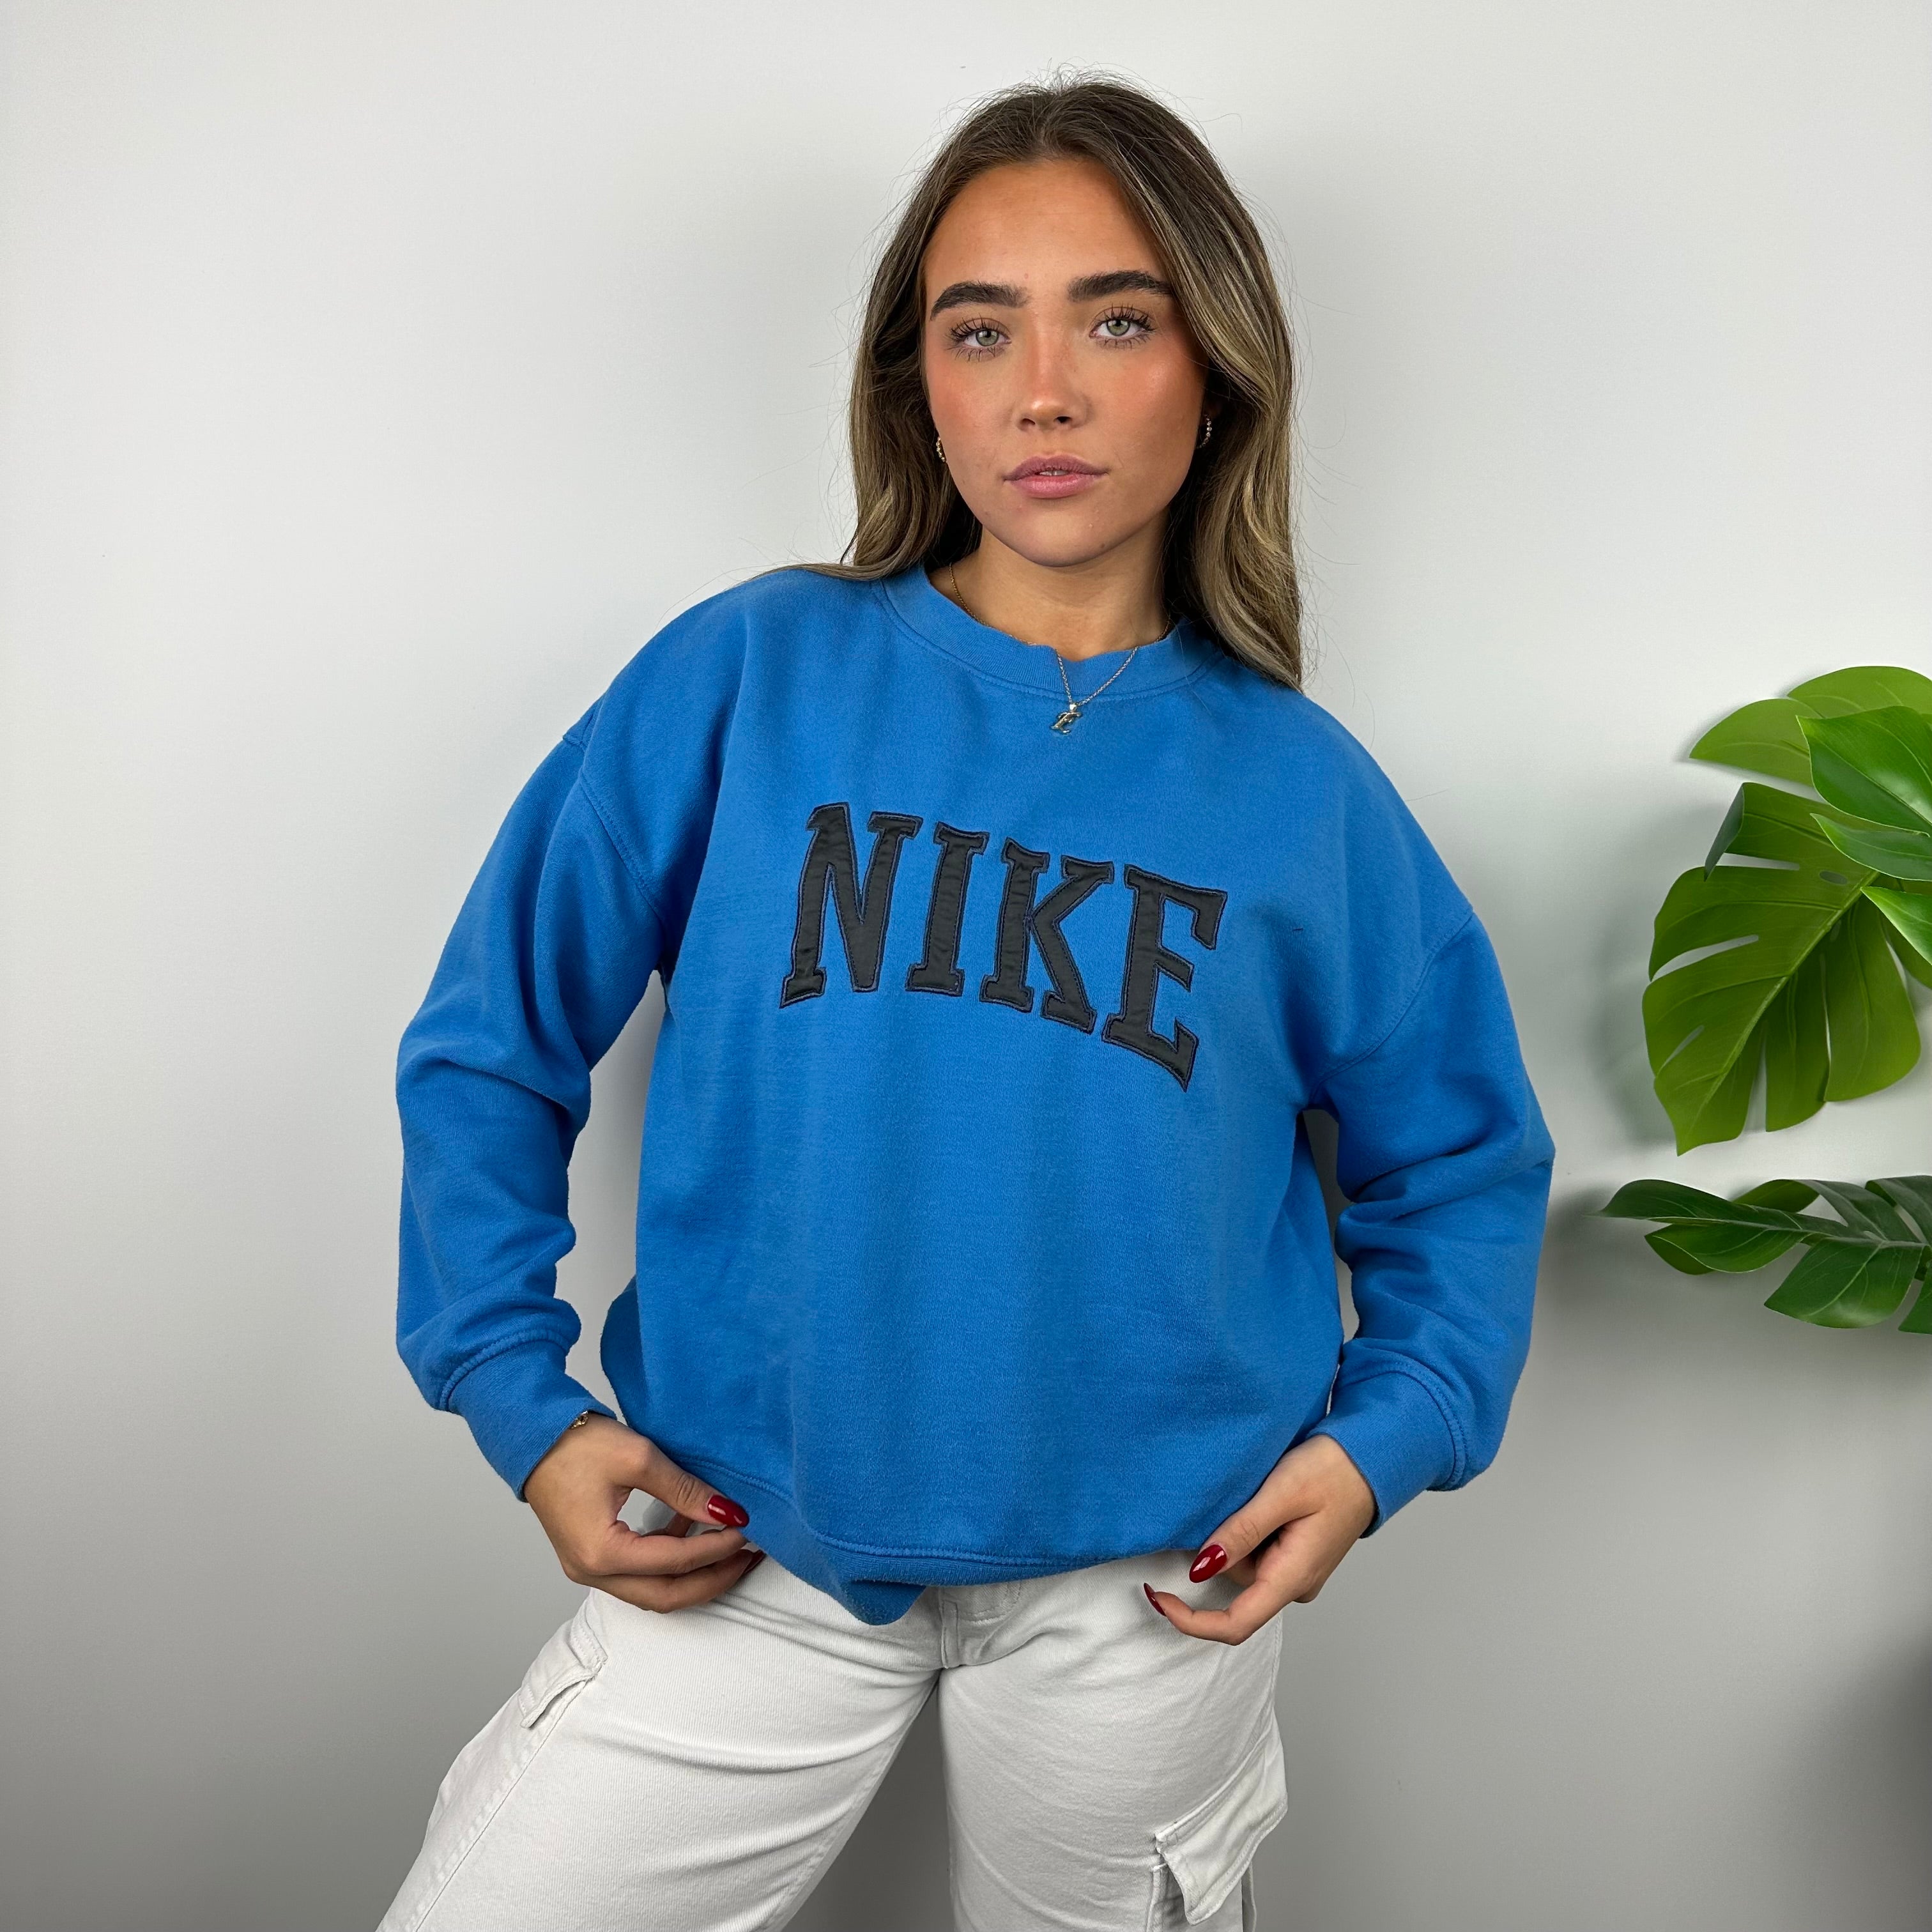 Nike Blue Embroidered Spell Out Sweatshirt (S)